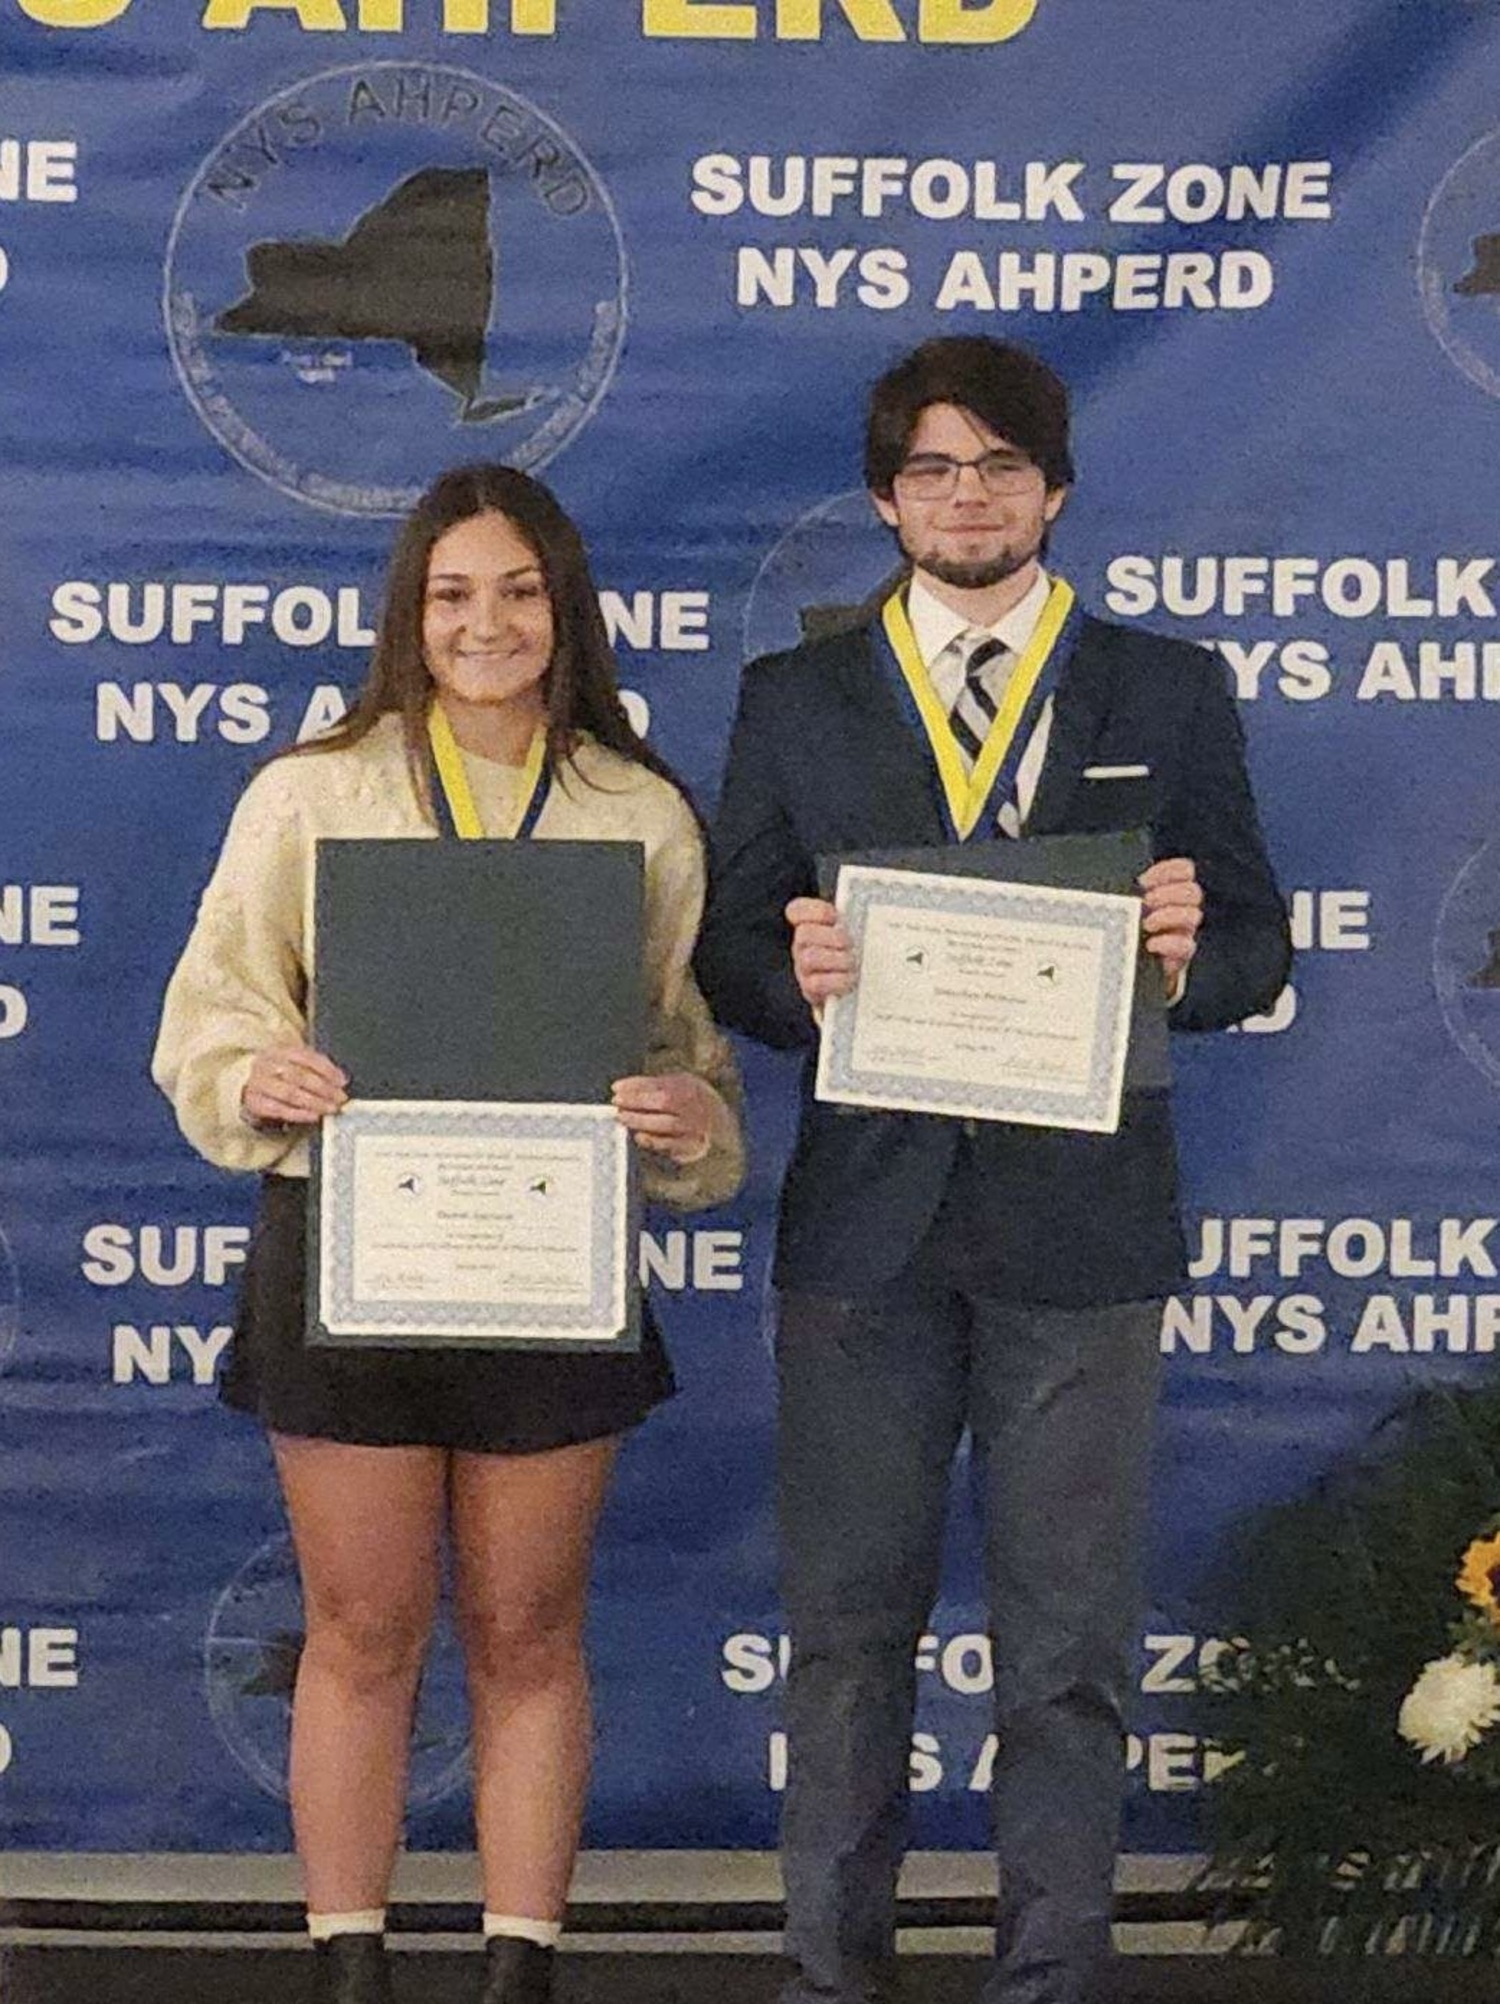 Eastport-South Manor Jr.-Sr. High School seniors Jonathan DiMarcco and Danni Sparacio received the 2024 NYS AHPERD Suffolk Zone Award. Sponsored by the New York State Association for Health, Physical Education, Recreation and Dance, the award recognizes one male and one female Suffolk County high school senior from each school district who exemplifies outstanding scholastic ability, physical education performance and leadership qualities. COURTESY EASTPORT-SOUTH MANOR SCHOOL DISTRICT